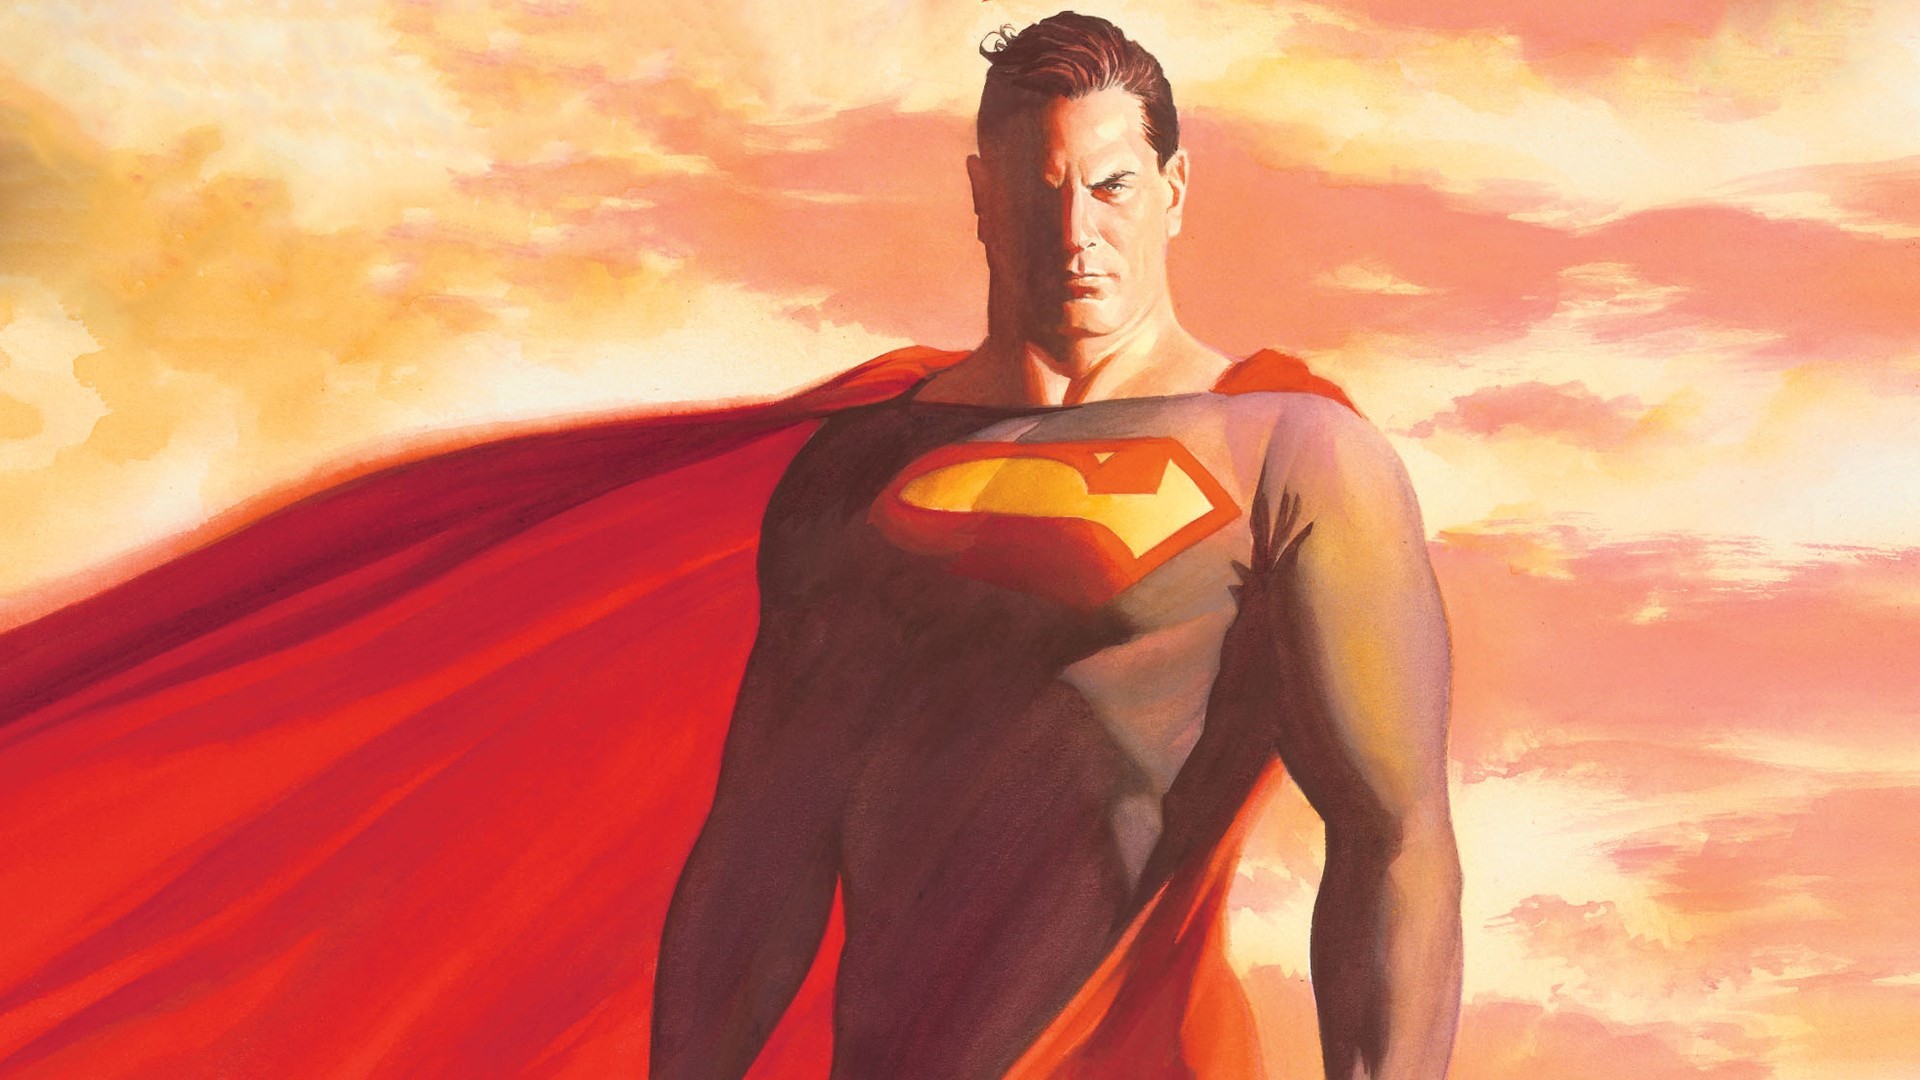 1920x1080 Widescreen Wallpapers: superman backround - superman category